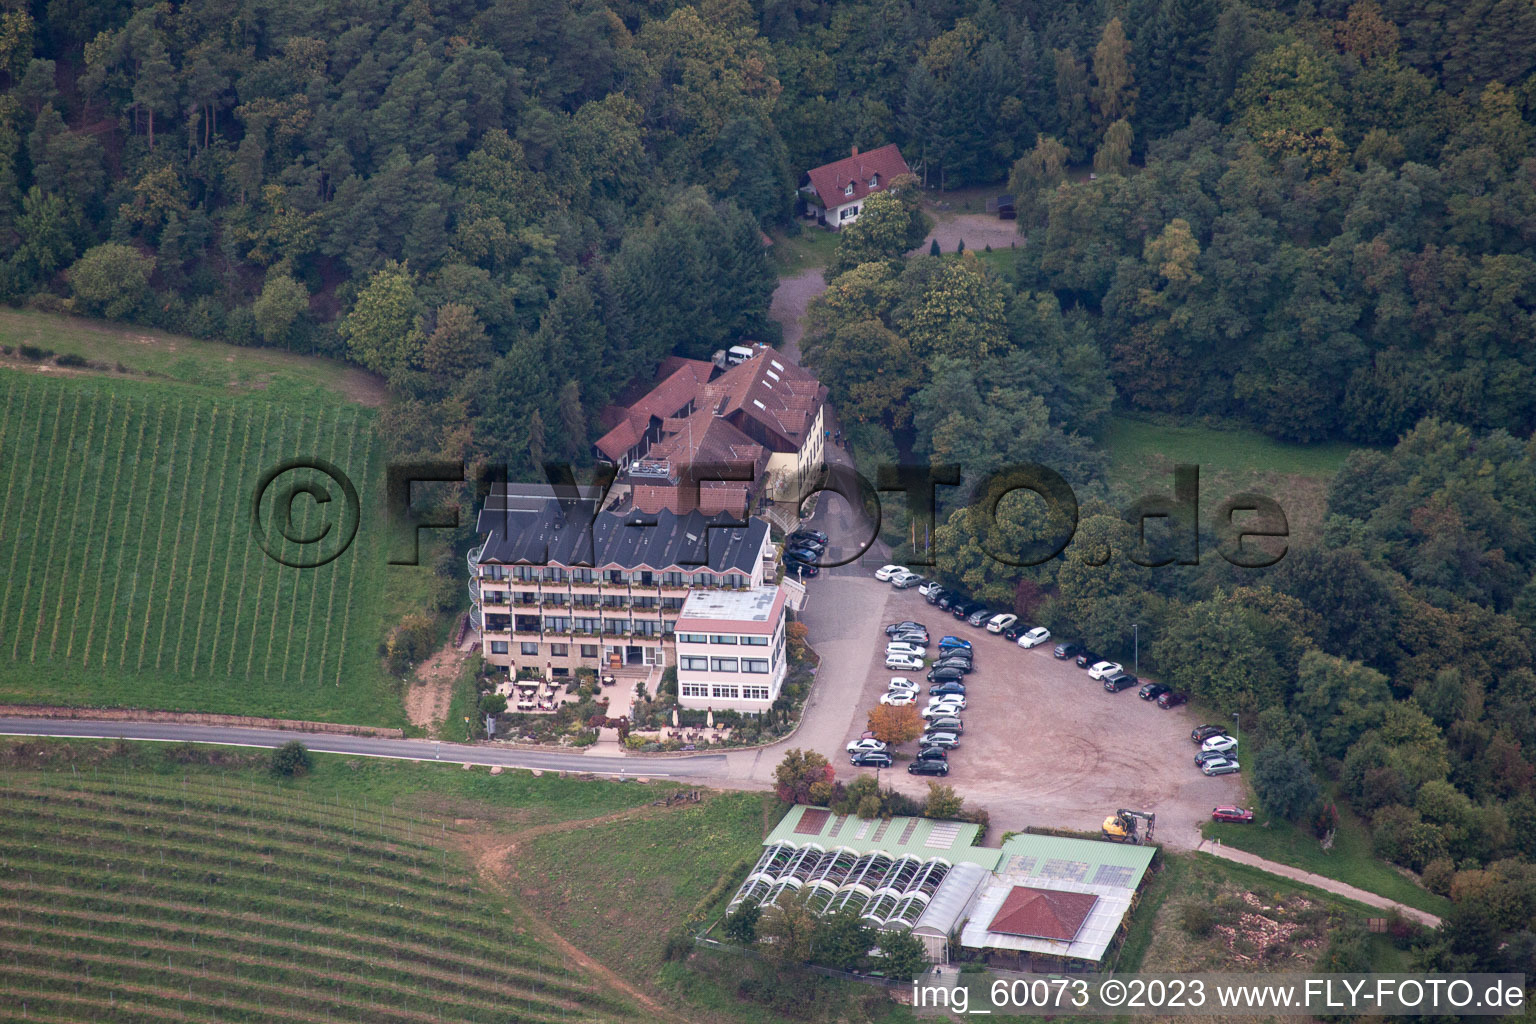 Aerial view of Hotel Haus am Weinberg in Sankt Martin in the state Rhineland-Palatinate, Germany